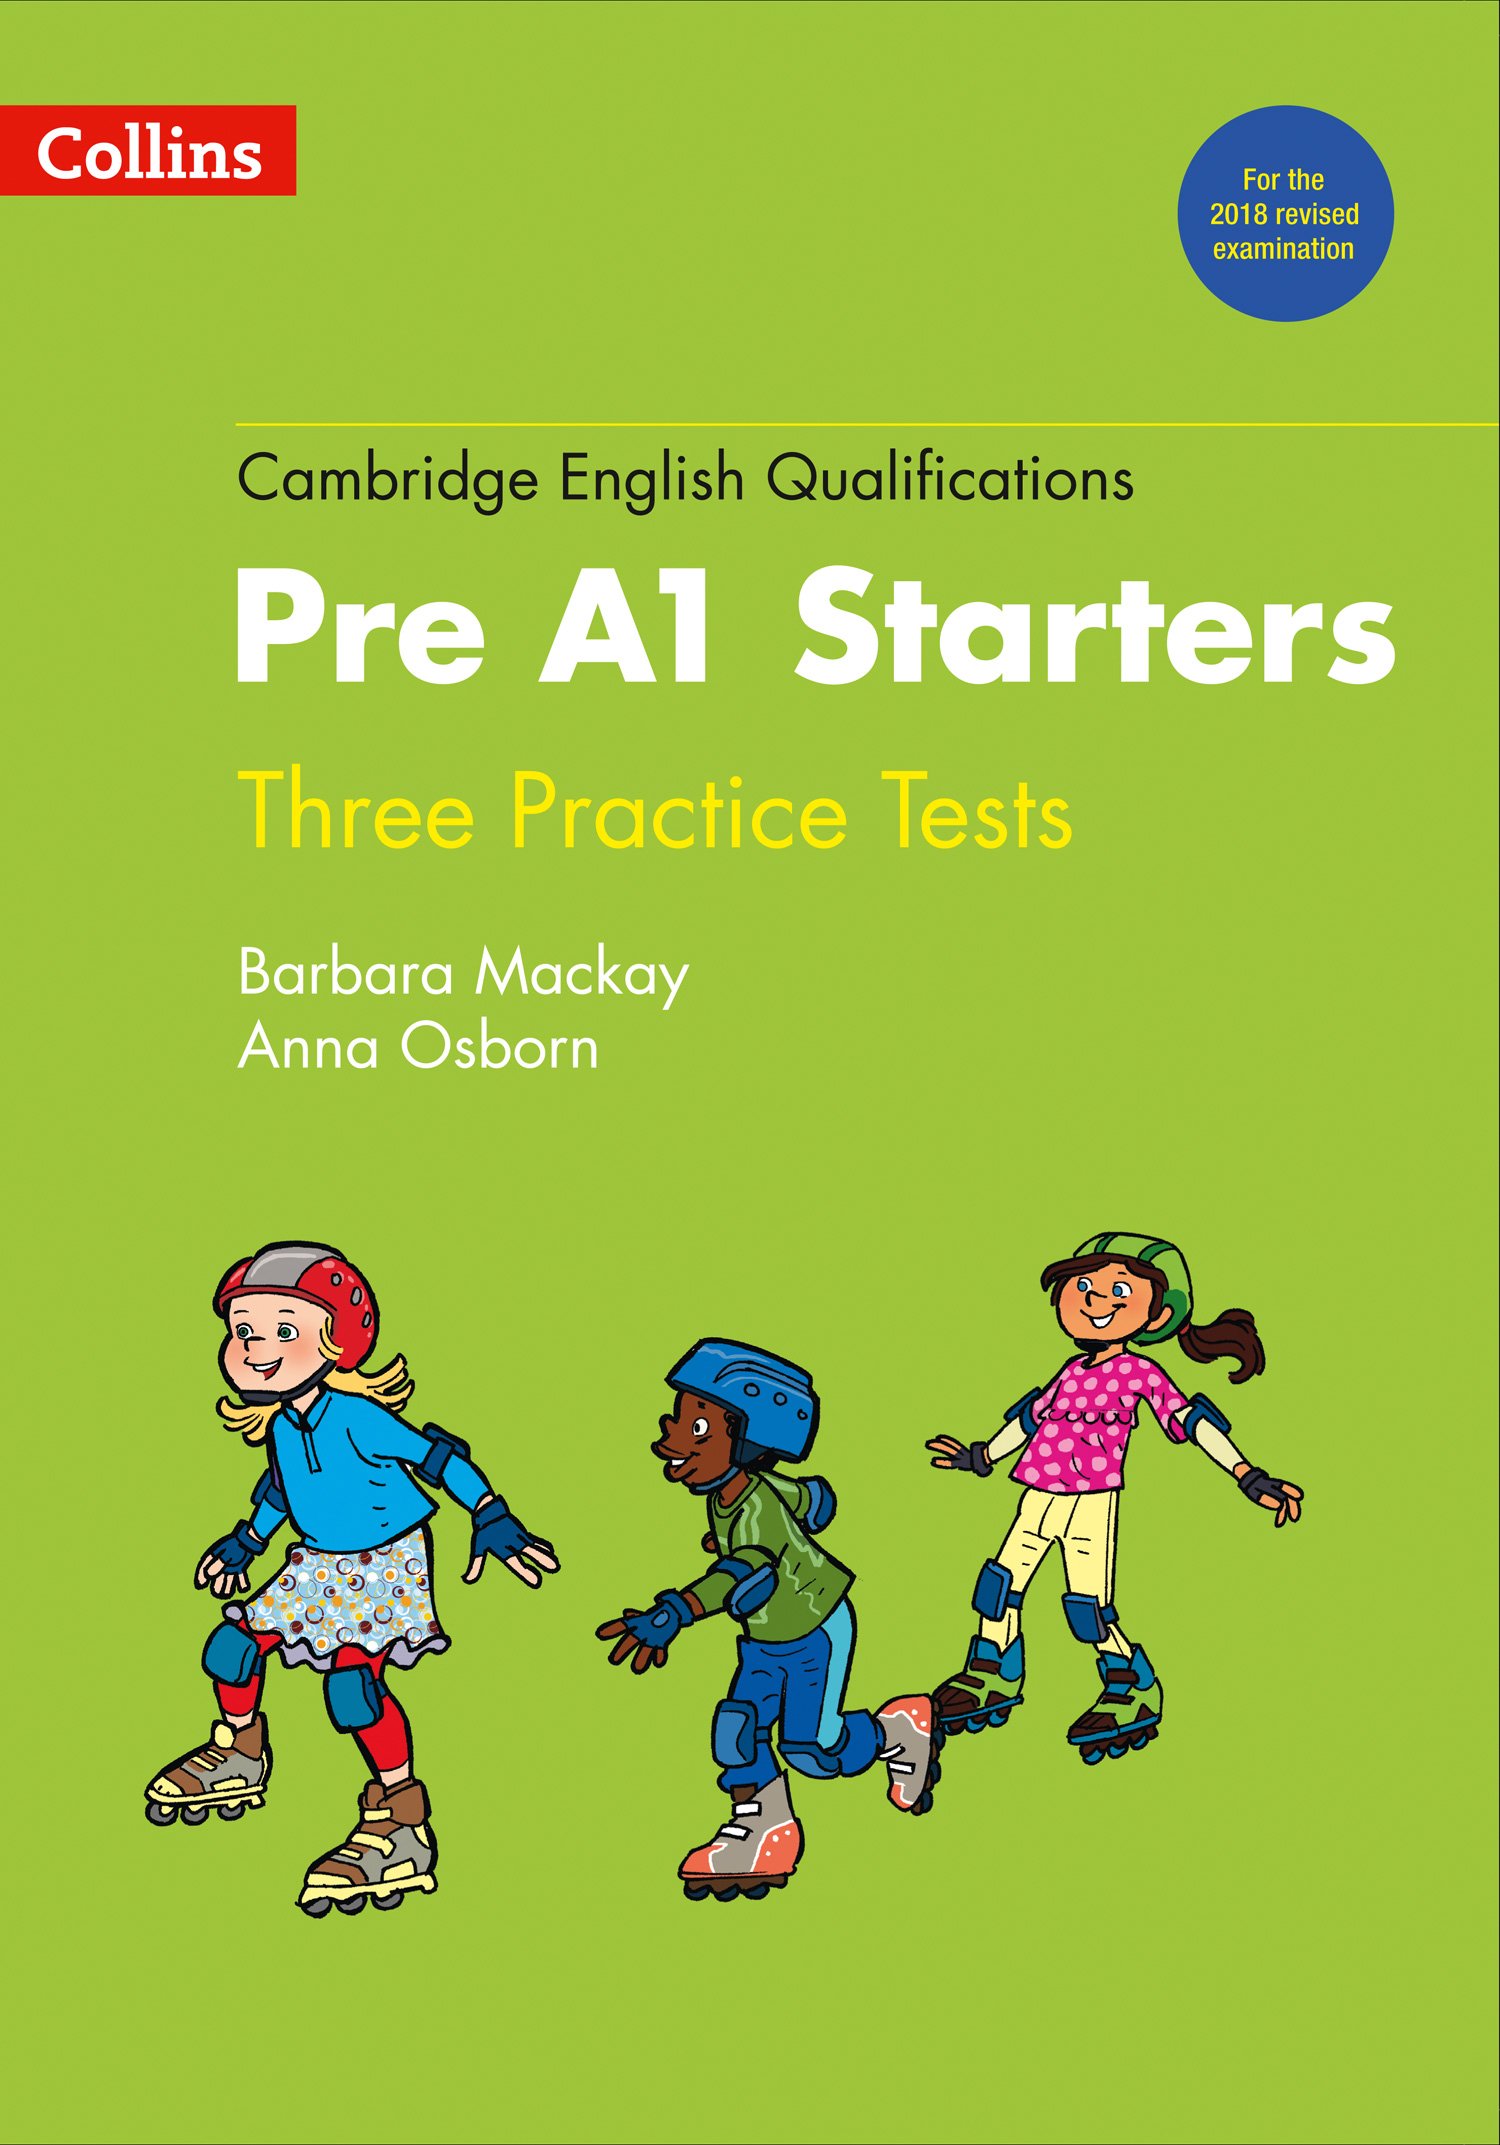 Pre a1 starters. Pre Starters a1 Starters a1. Cambridge English Qualifications pre a1 Starters Audio. Pre Starters Cambridge. Collins Starters.